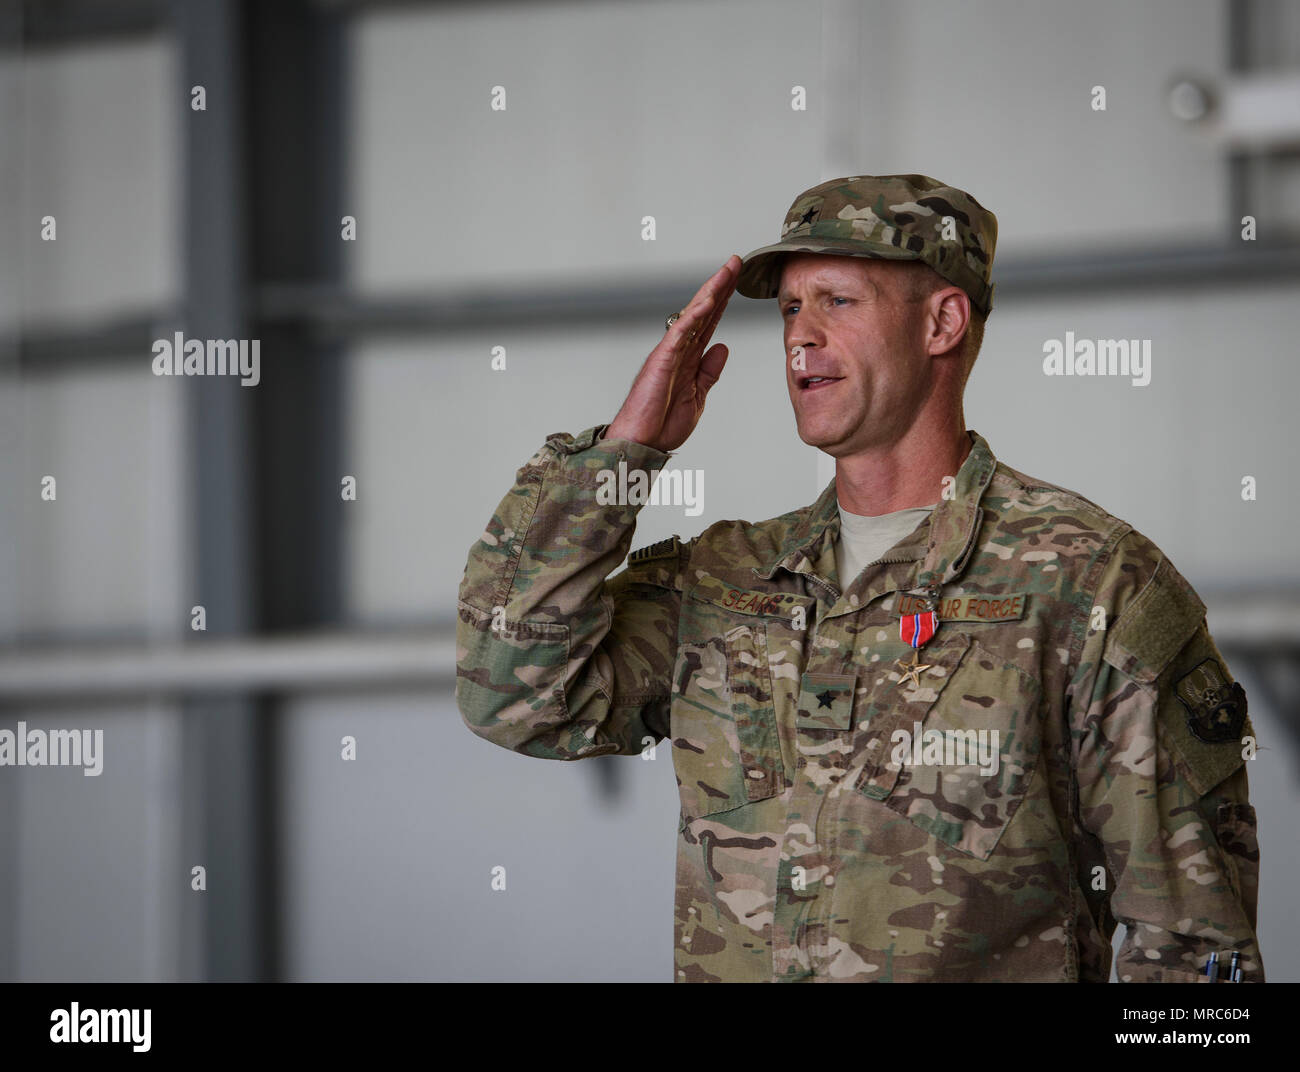 Brig. Gen. Jim Sears renders his final salute as the 455th Air Expeditionary Wing commander during a change of command ceremony at Bagram Airfield, Afghanistan, June 3, 2017. Sears commanded the 455th AEW for the last 12 months. During his time at Bagram, Sears’ leadership enabled 15,800 combat sorties, accumulating to 102,877 combat hours, which resulted in more than 1,369 kinetic strike and 2,836 enemies killed in action. (U.S. Air Force photo by Staff Sgt. Benjamin Gonsier) Stock Photo